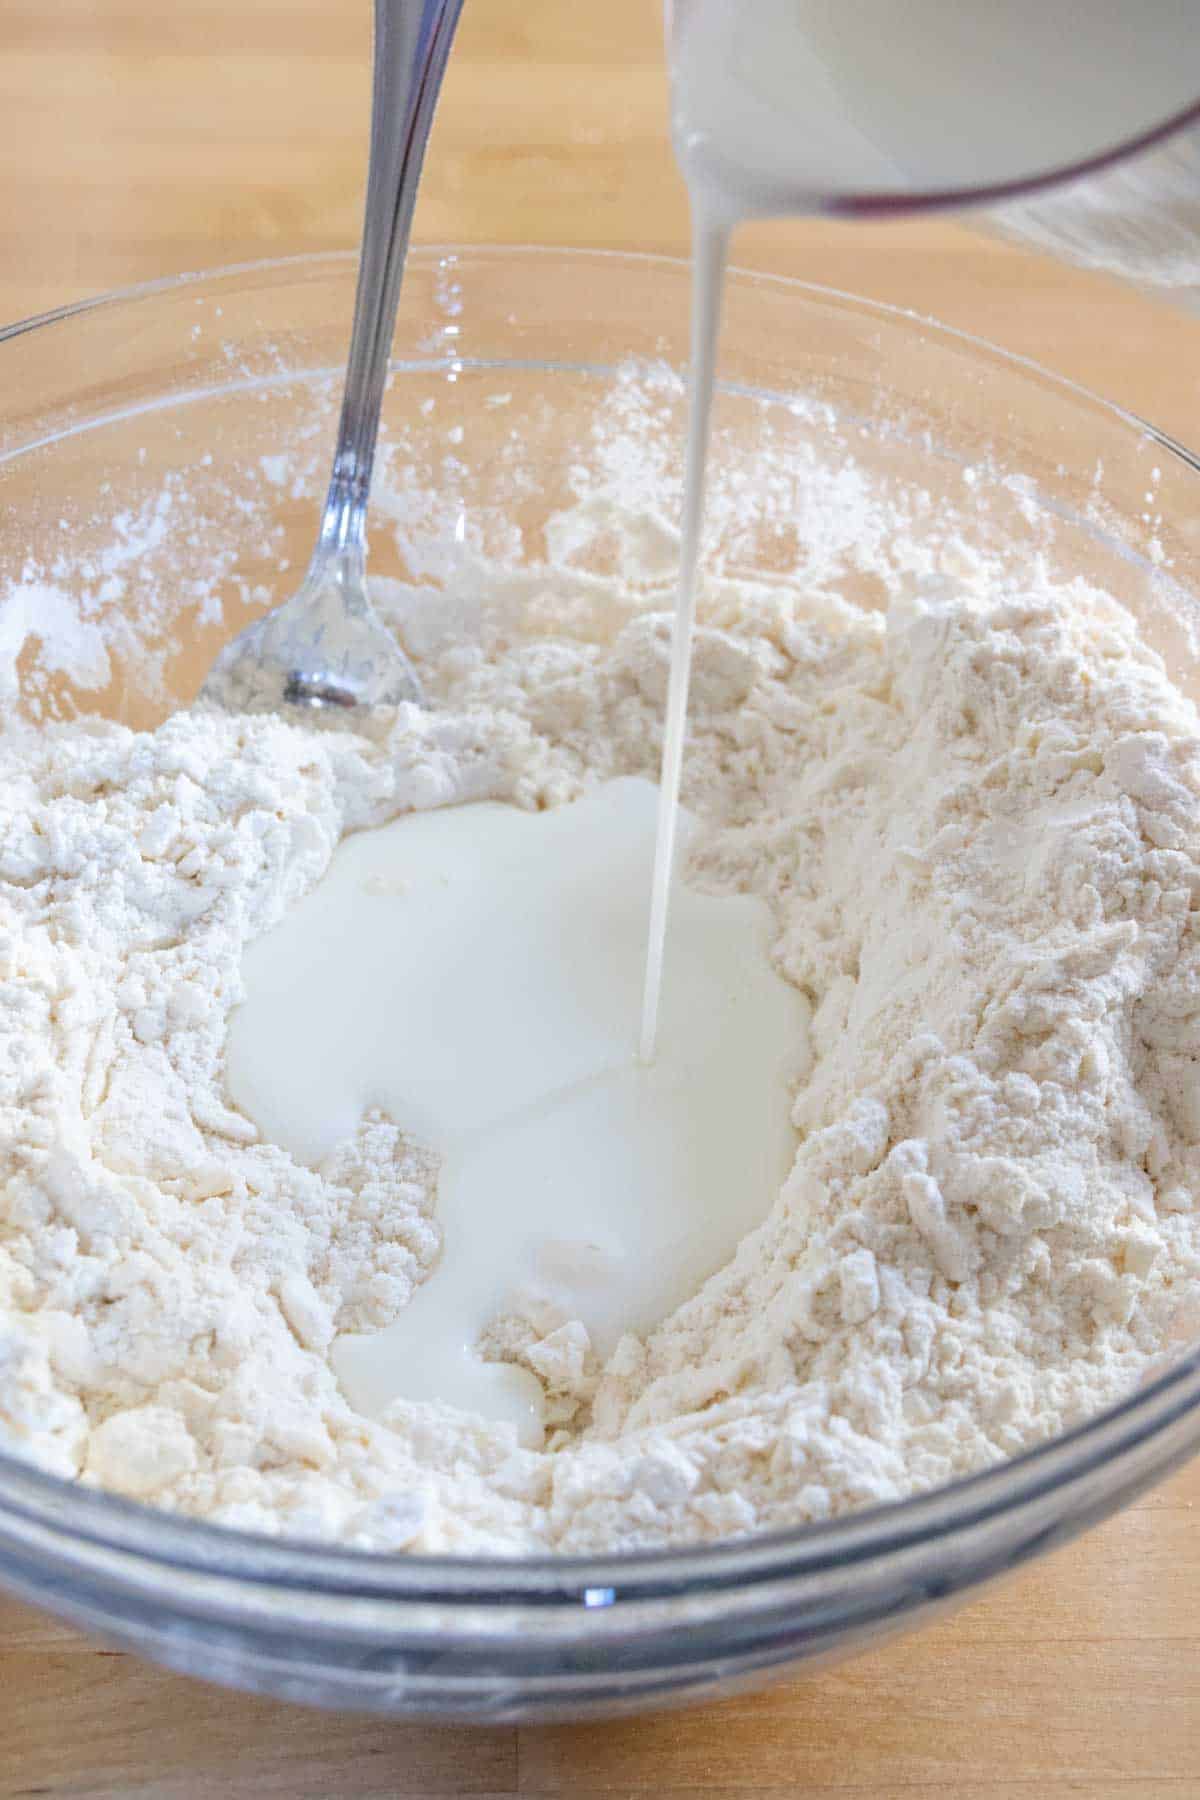 Pouring buttermilk into biscuit dough.